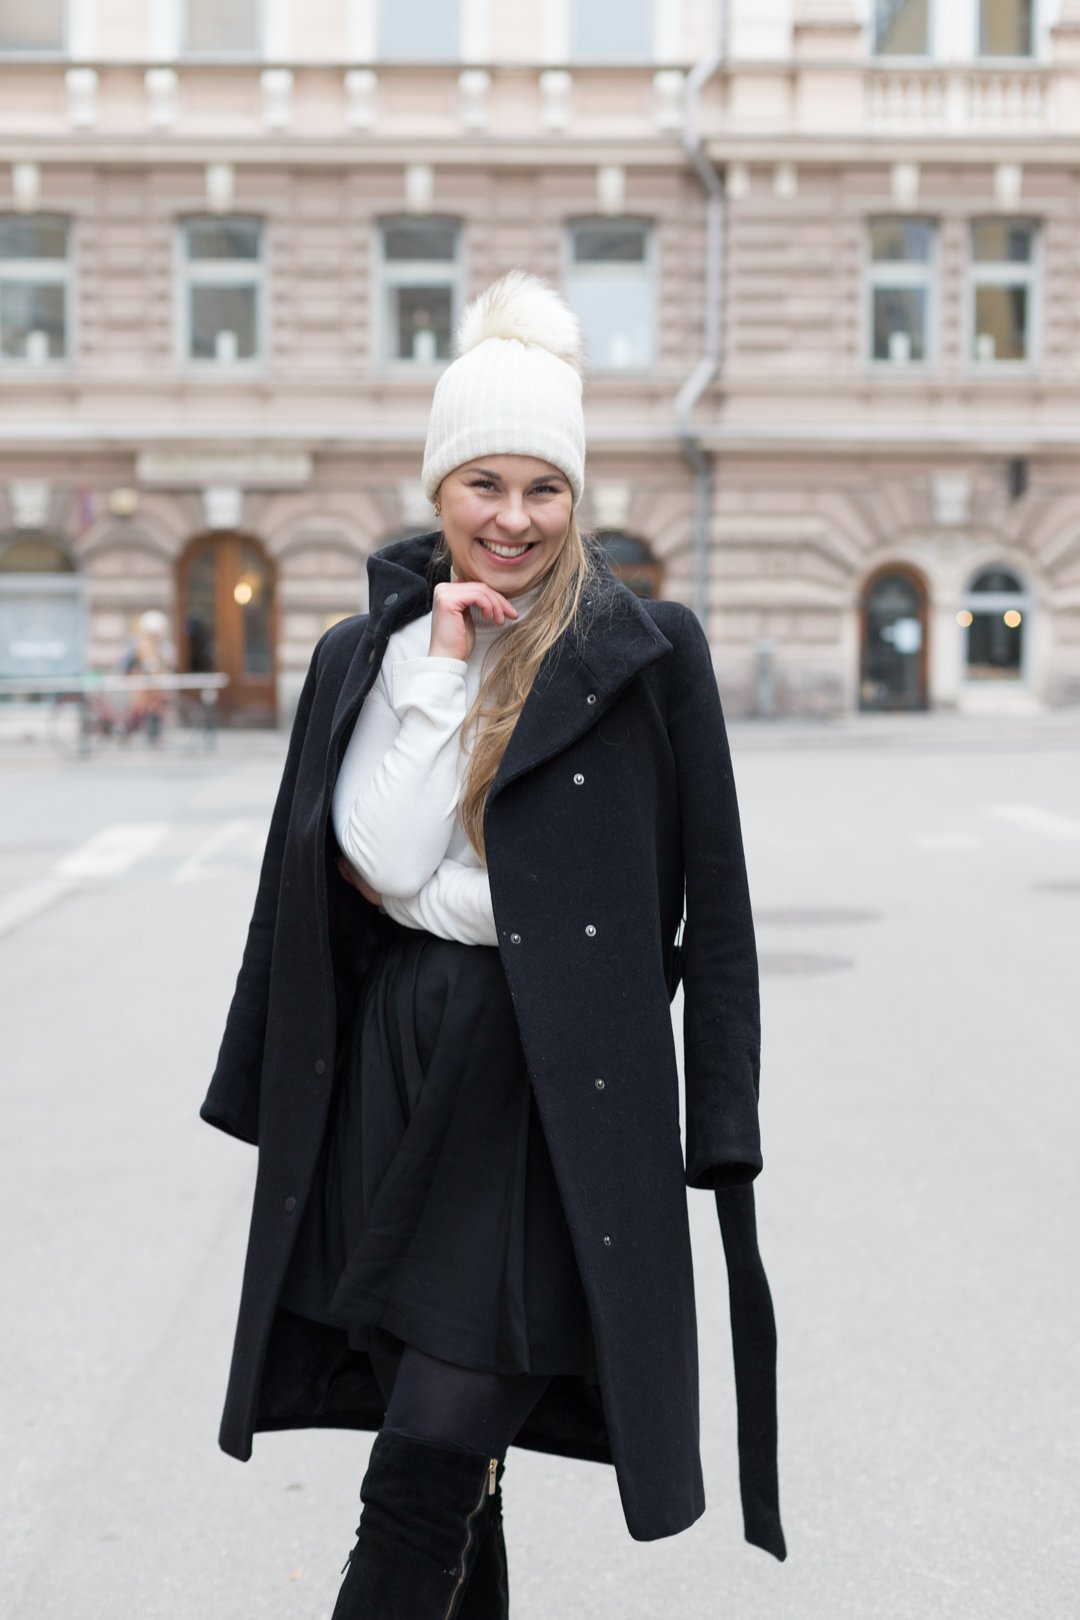 Winter outfit in Finland